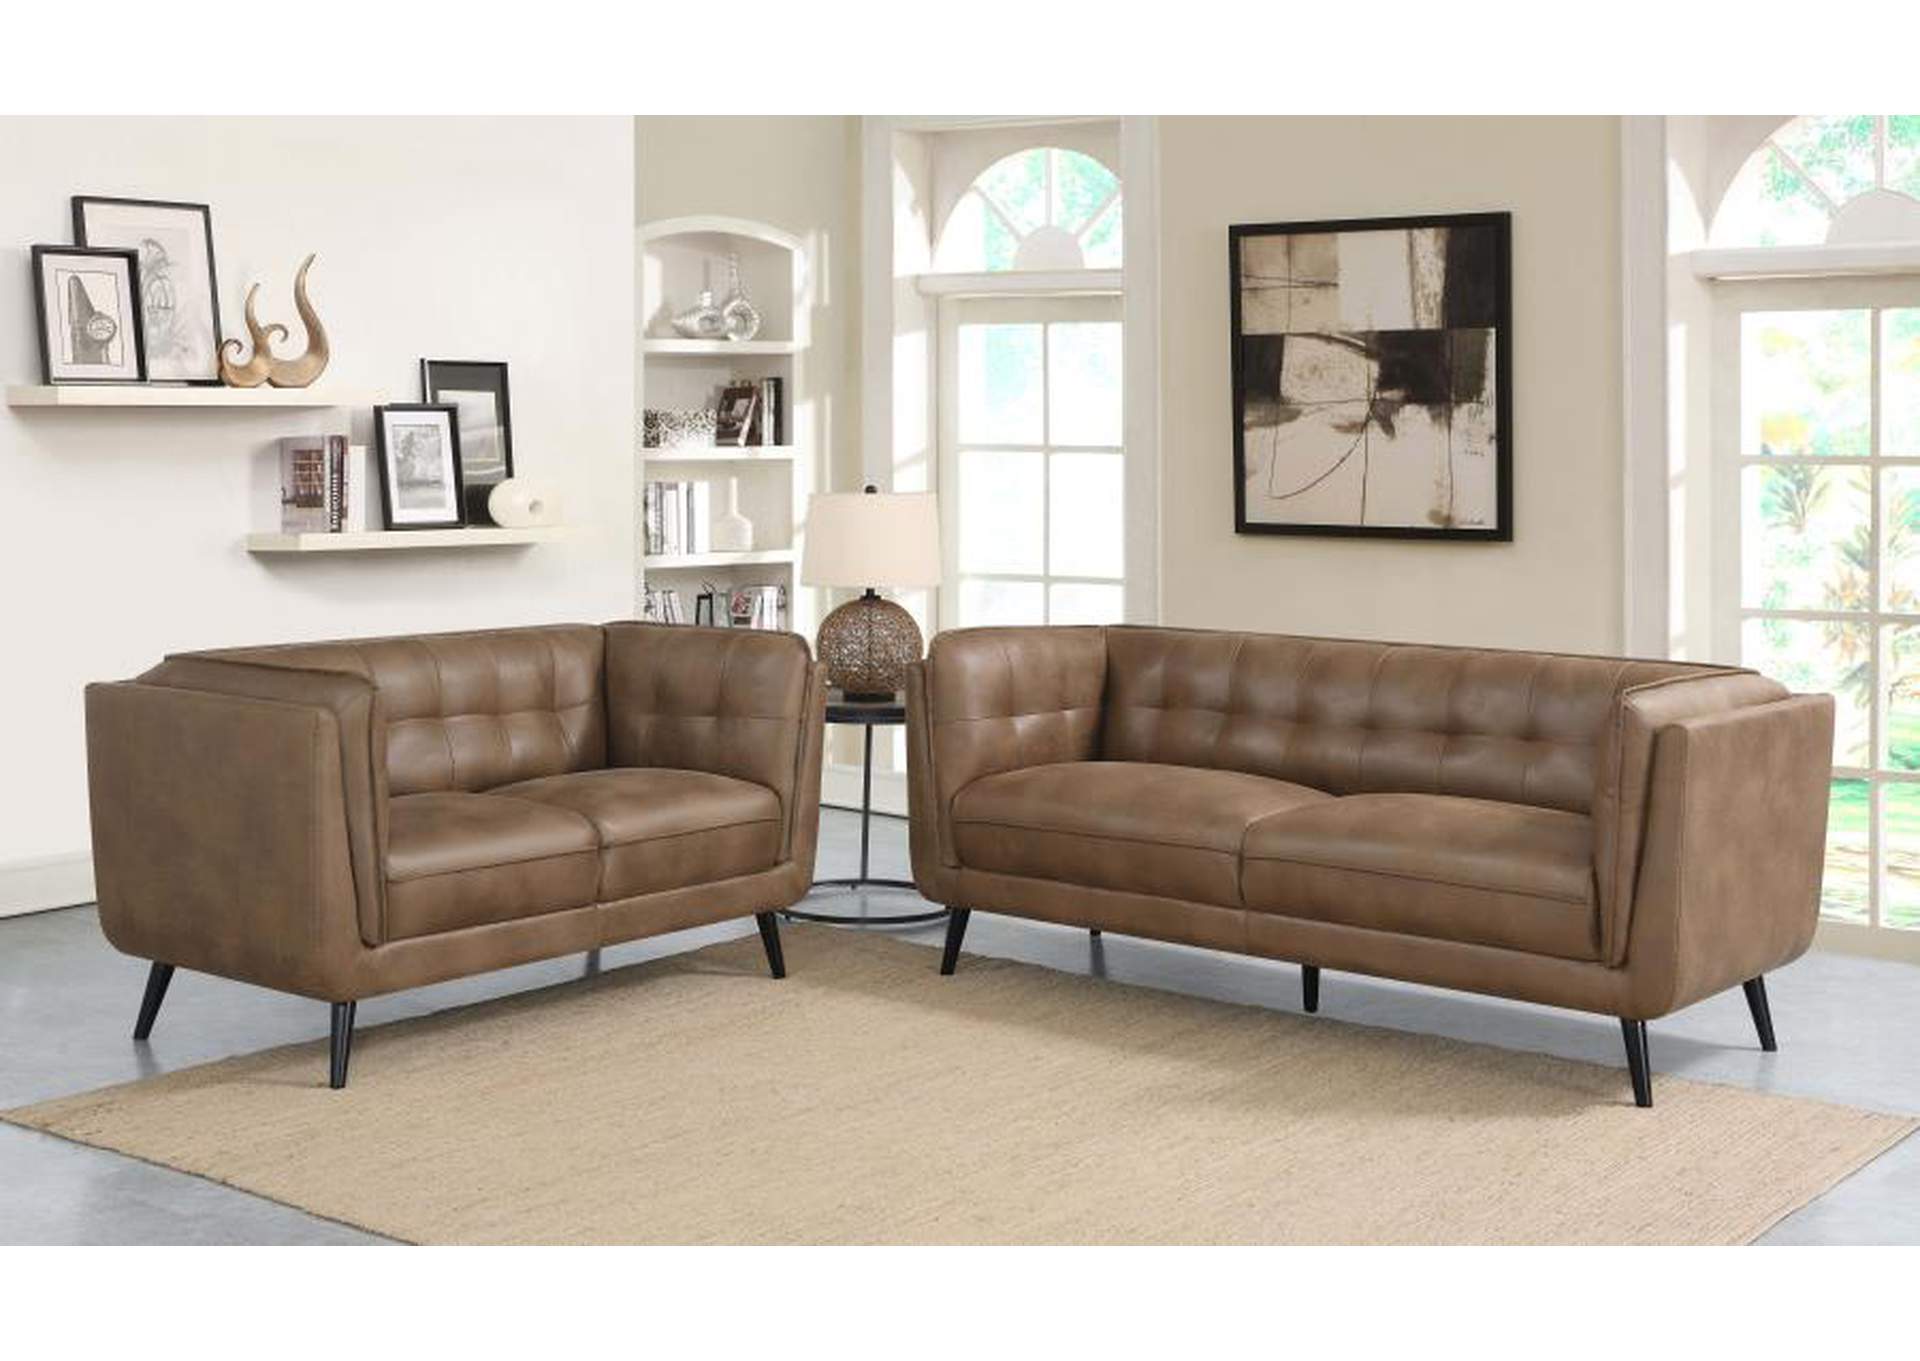 3 Piece Upholstered Living Room Sofa Set 3-Seat Couch Loveseat and Sofa  Chair